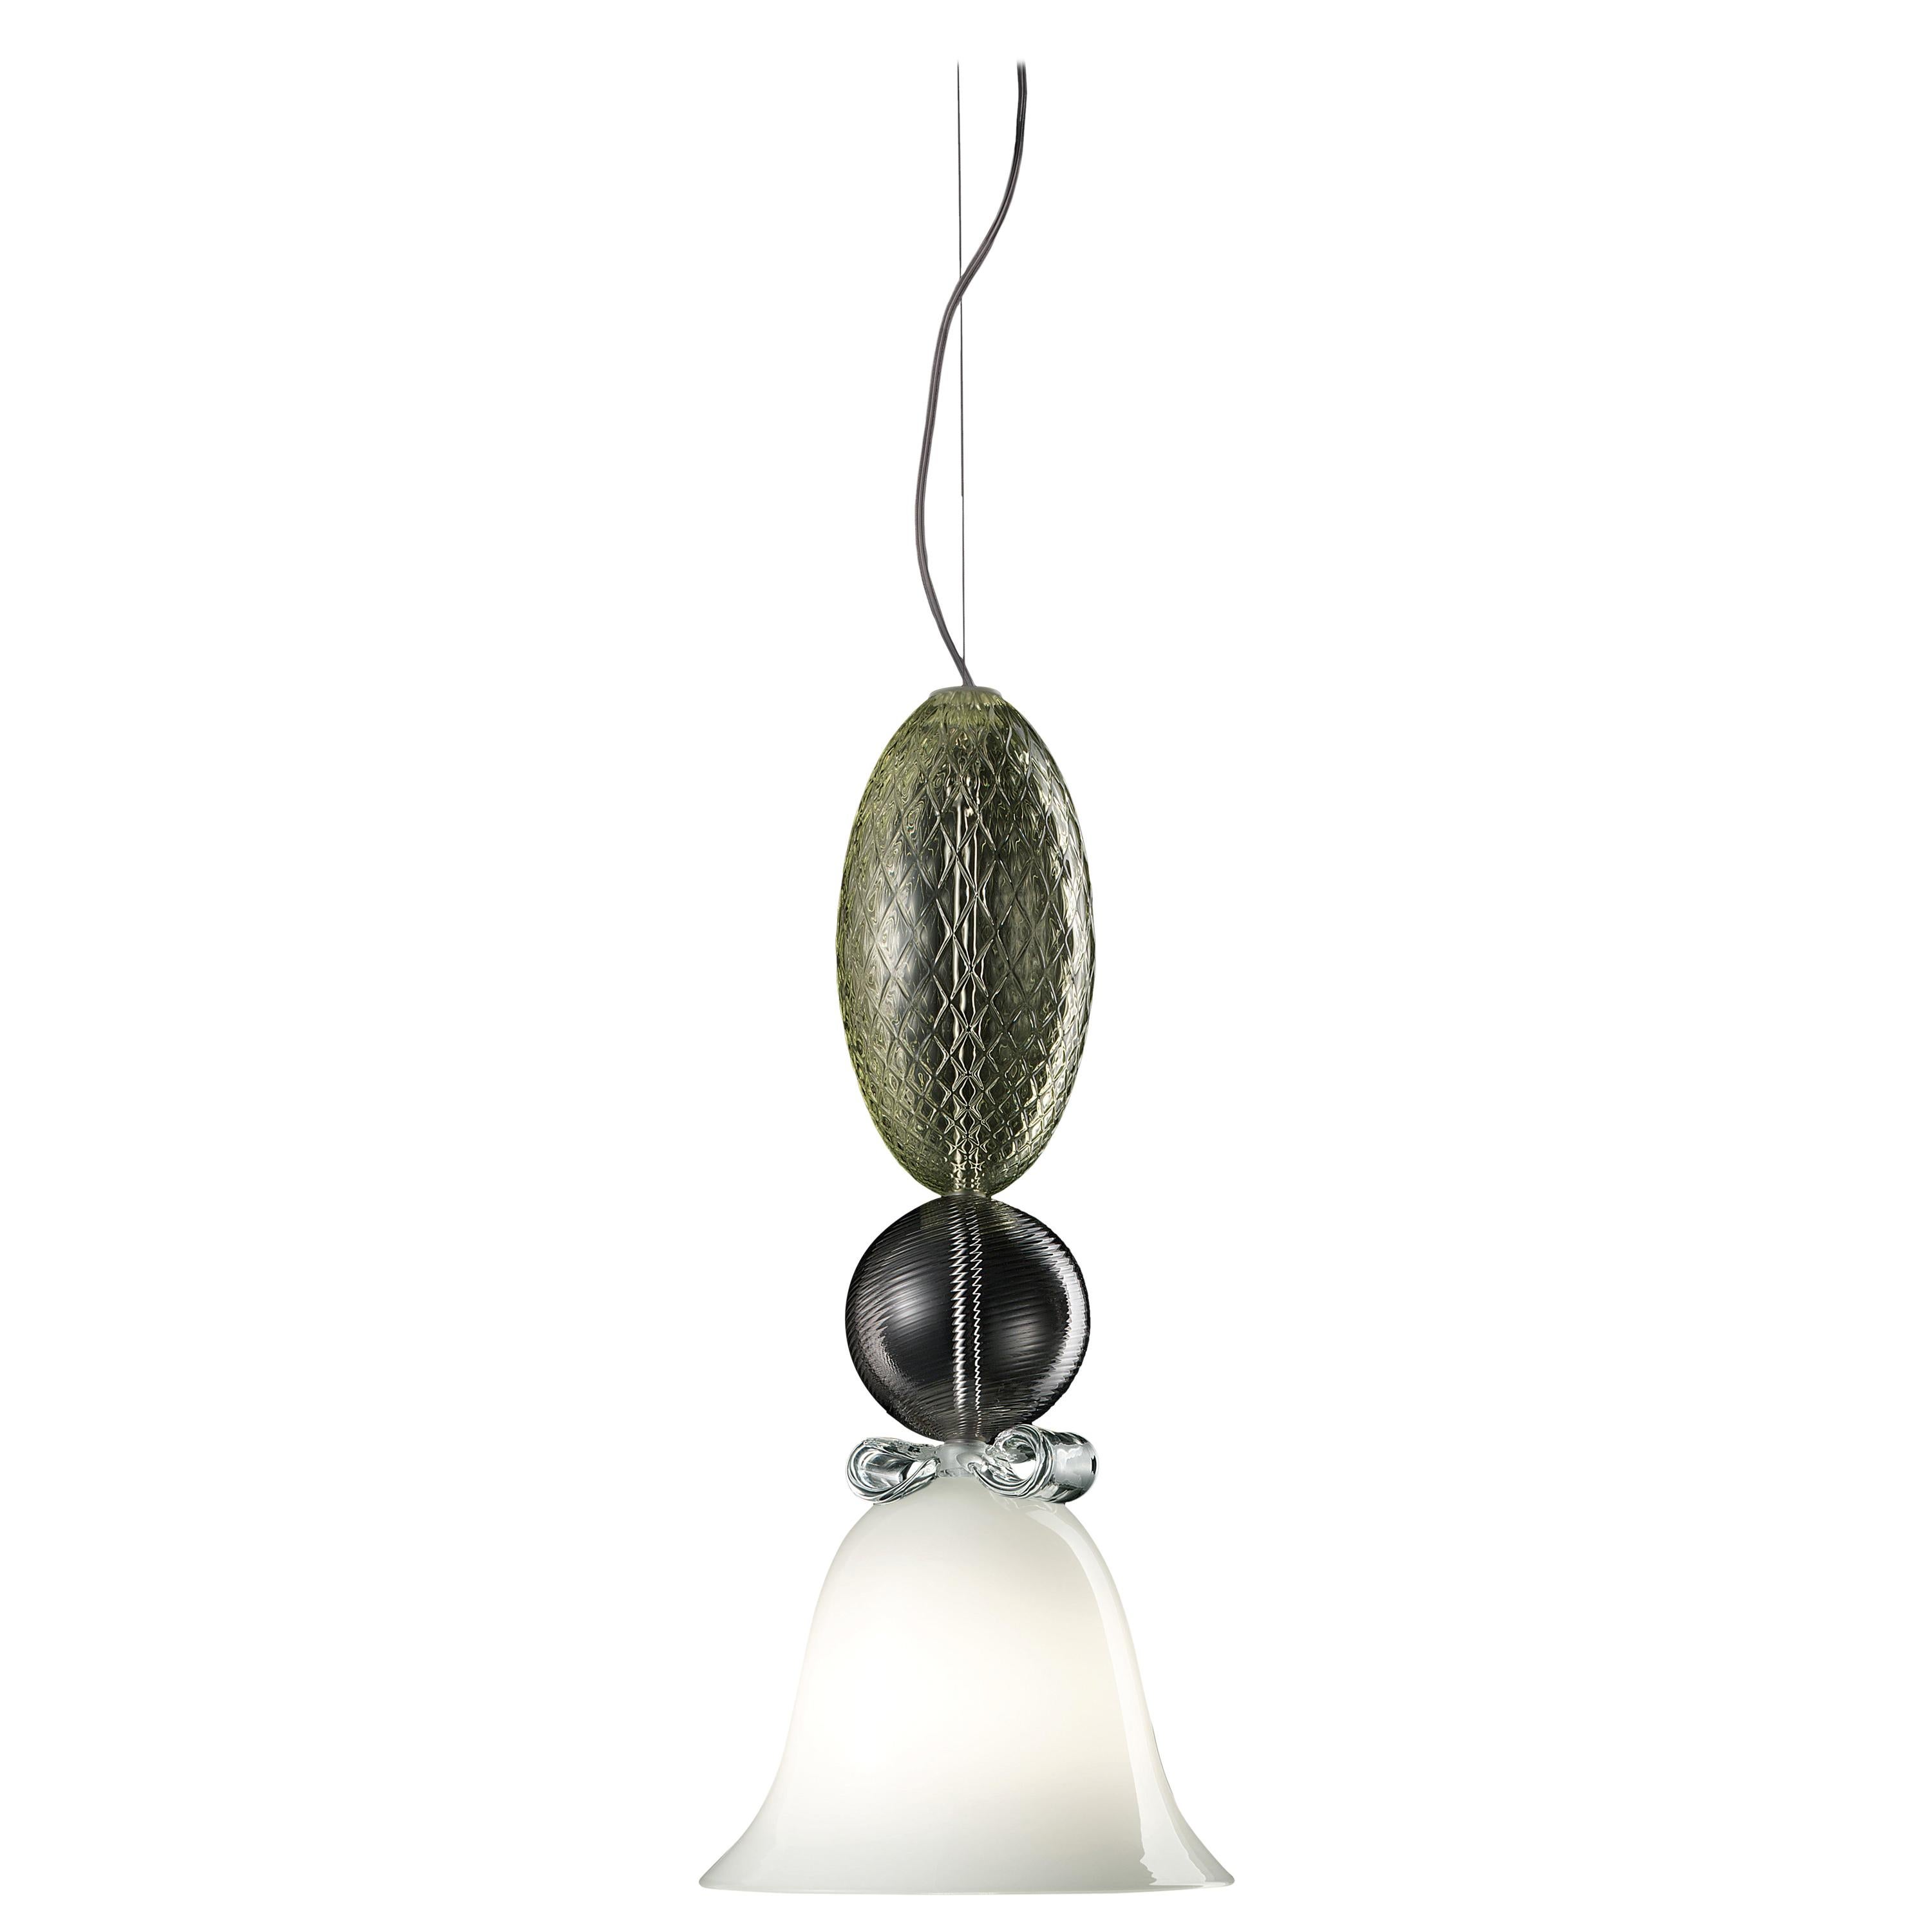 Multi (White / Crystal / Grey / Liquid Citron_WQ) Perseus 7310 Suspension Lamp in Glass, by Marcel Wanders